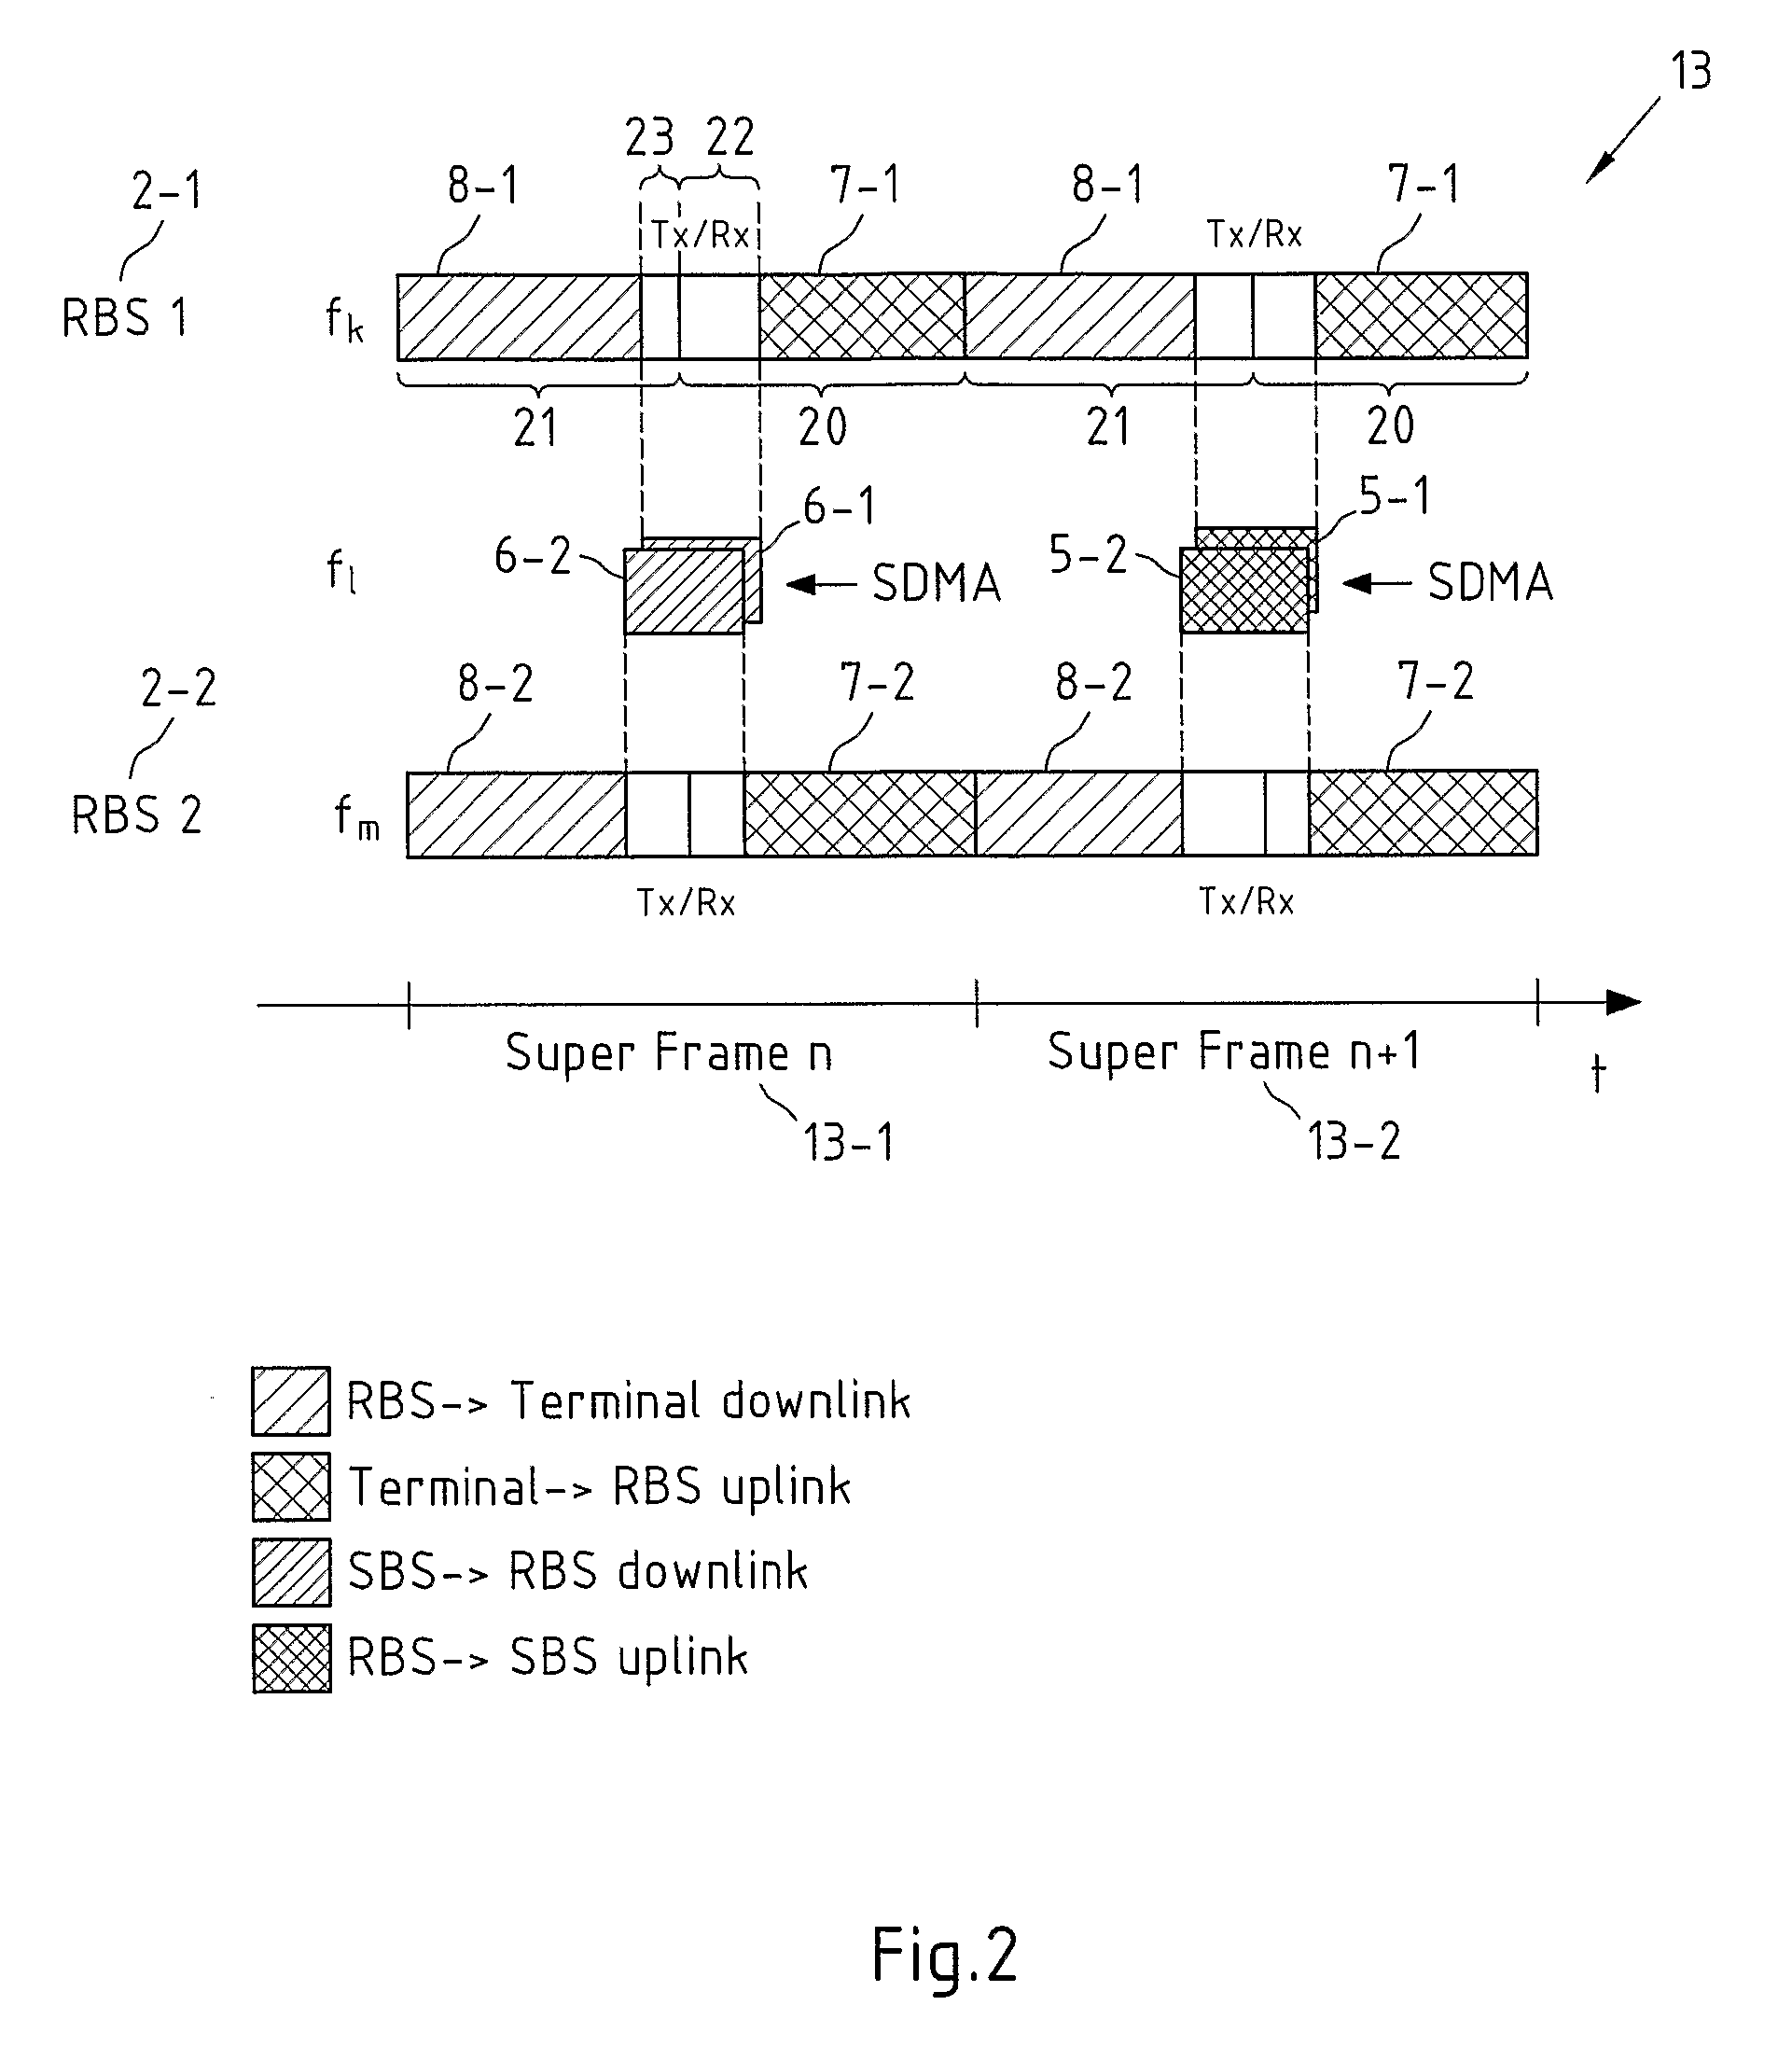 Communication System Using Relay Base Stations with Asymmetric Data Links